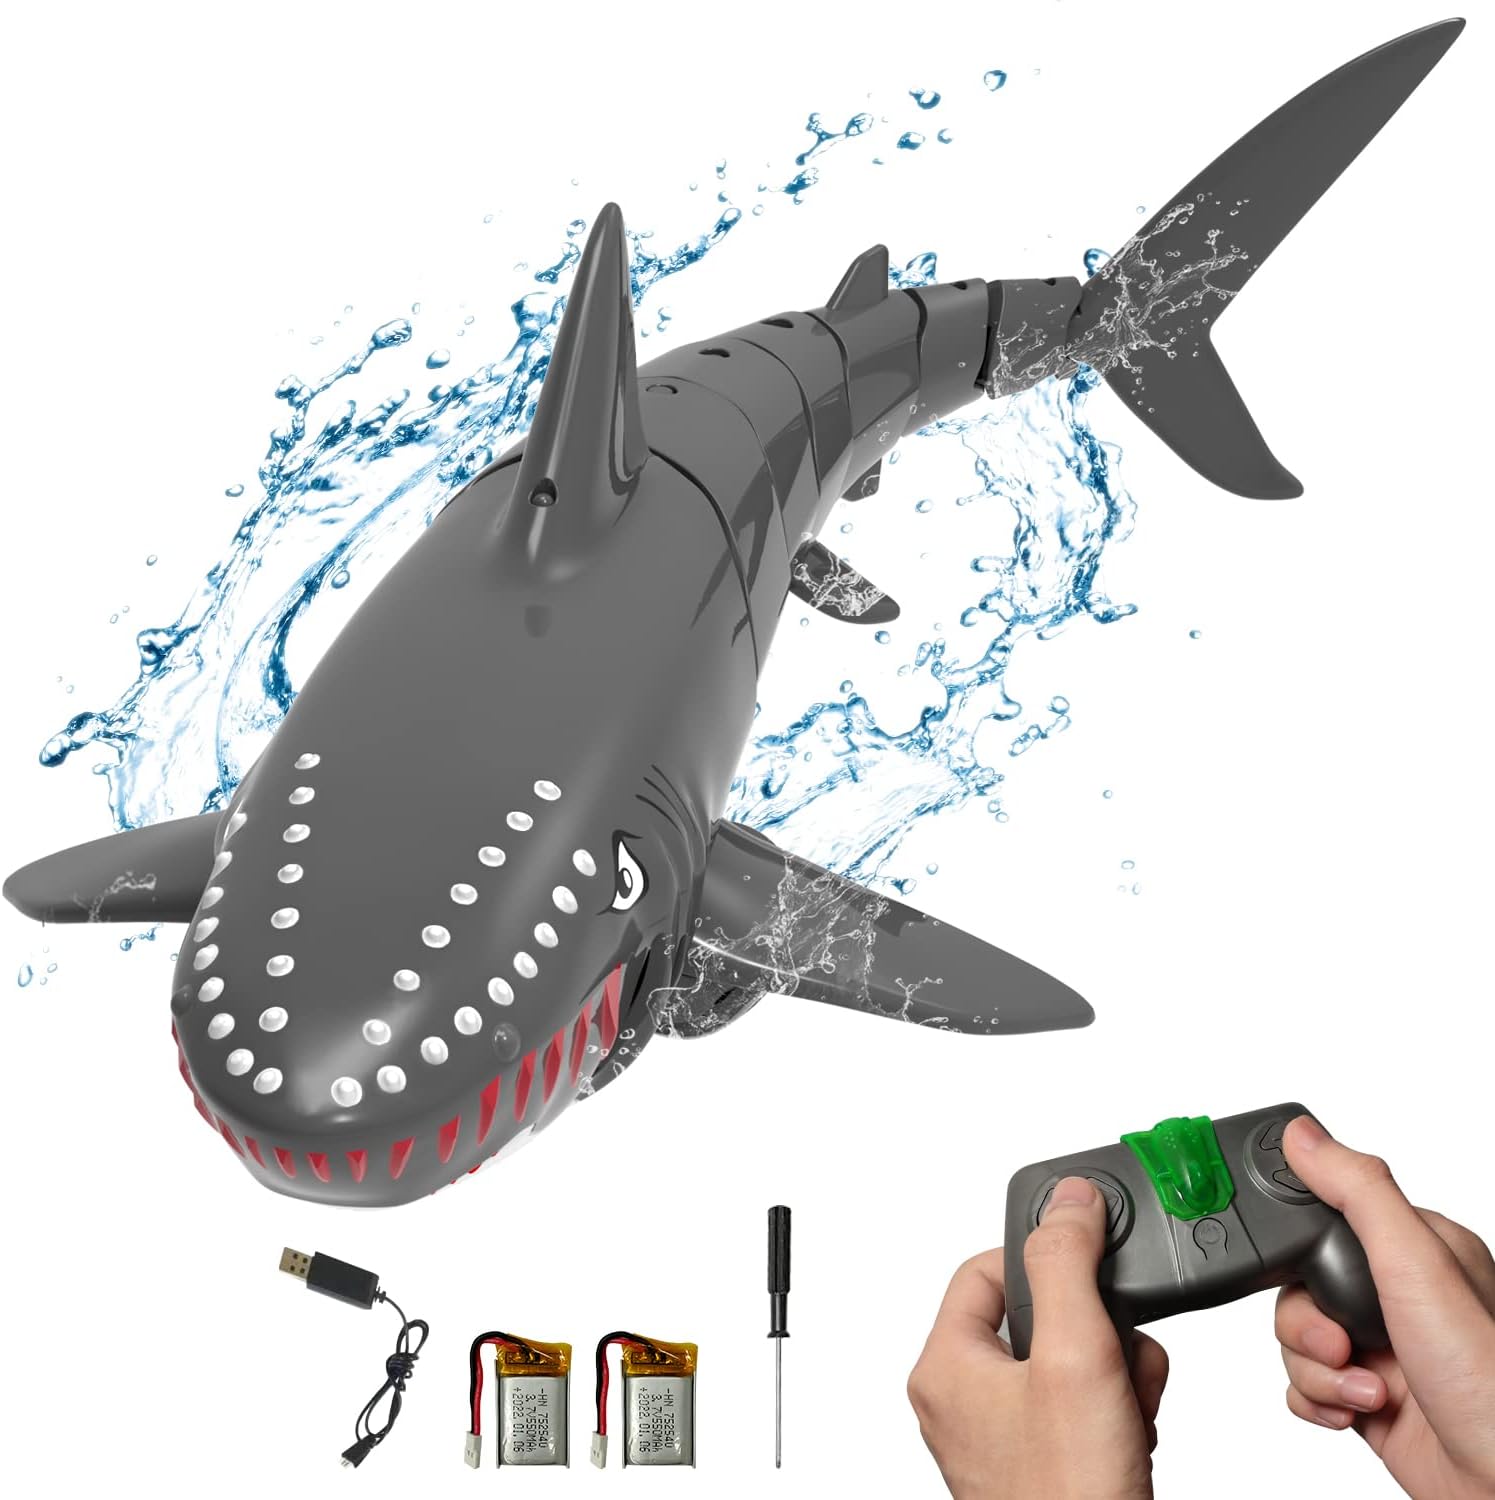 Waterproof RC Shark Radio Control Toy Remote Control Boat RC Boat for